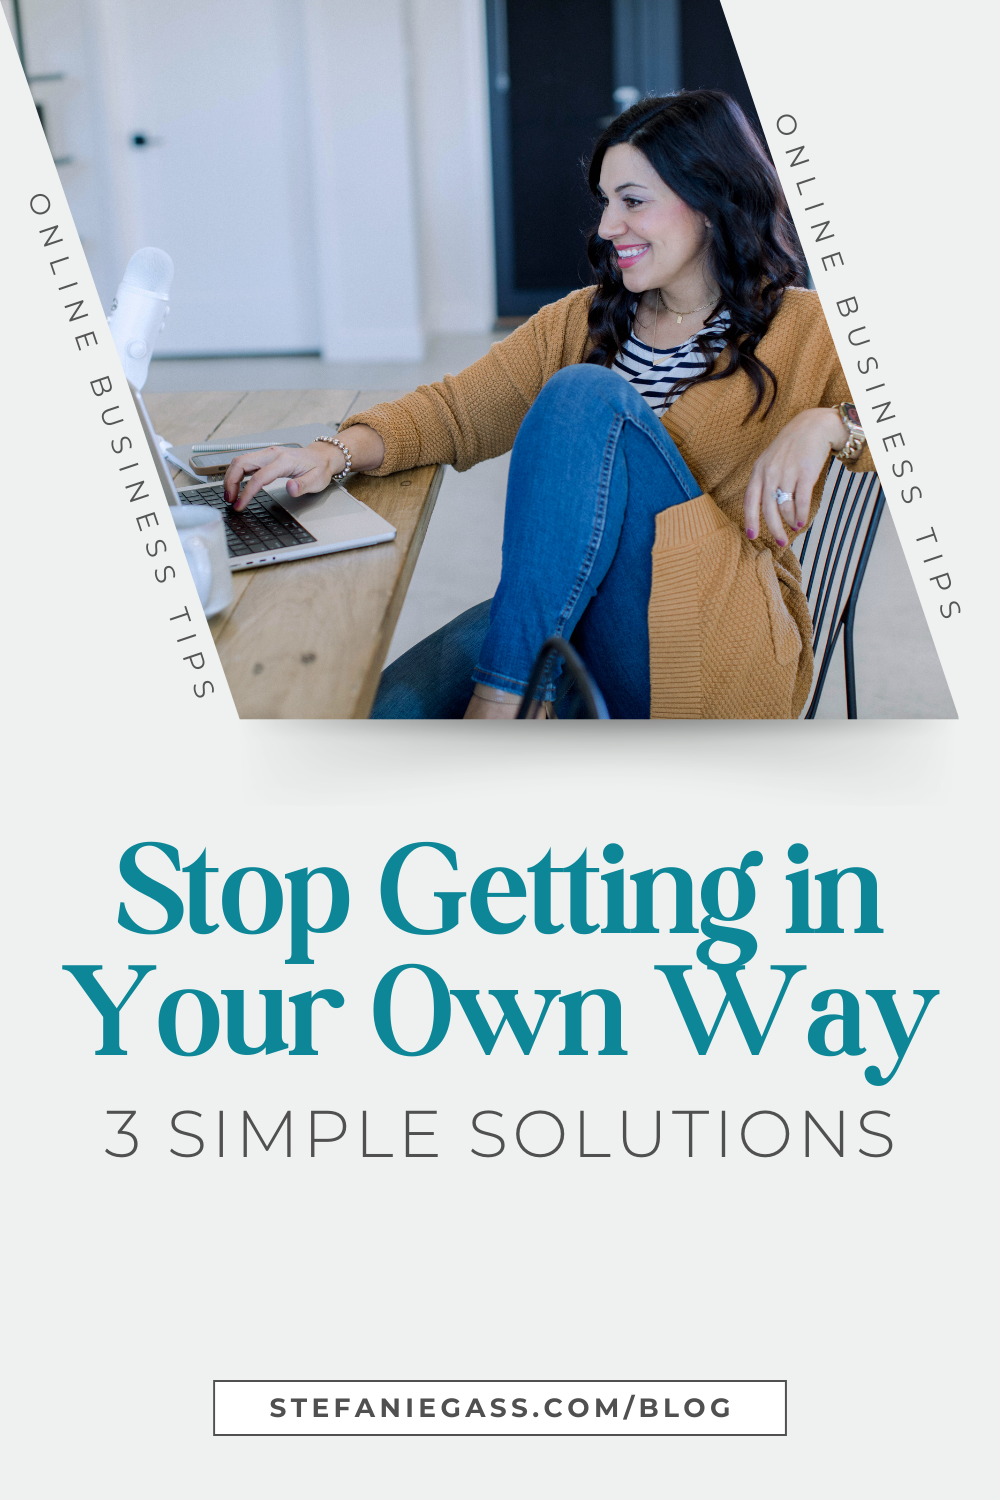 Brown haired woman sitting at desk with laptop, smiling, coffee mug, she's wearing a brown top with jeans. Text says: Stop Getting in Your Own Way, 3 Simple Solutions